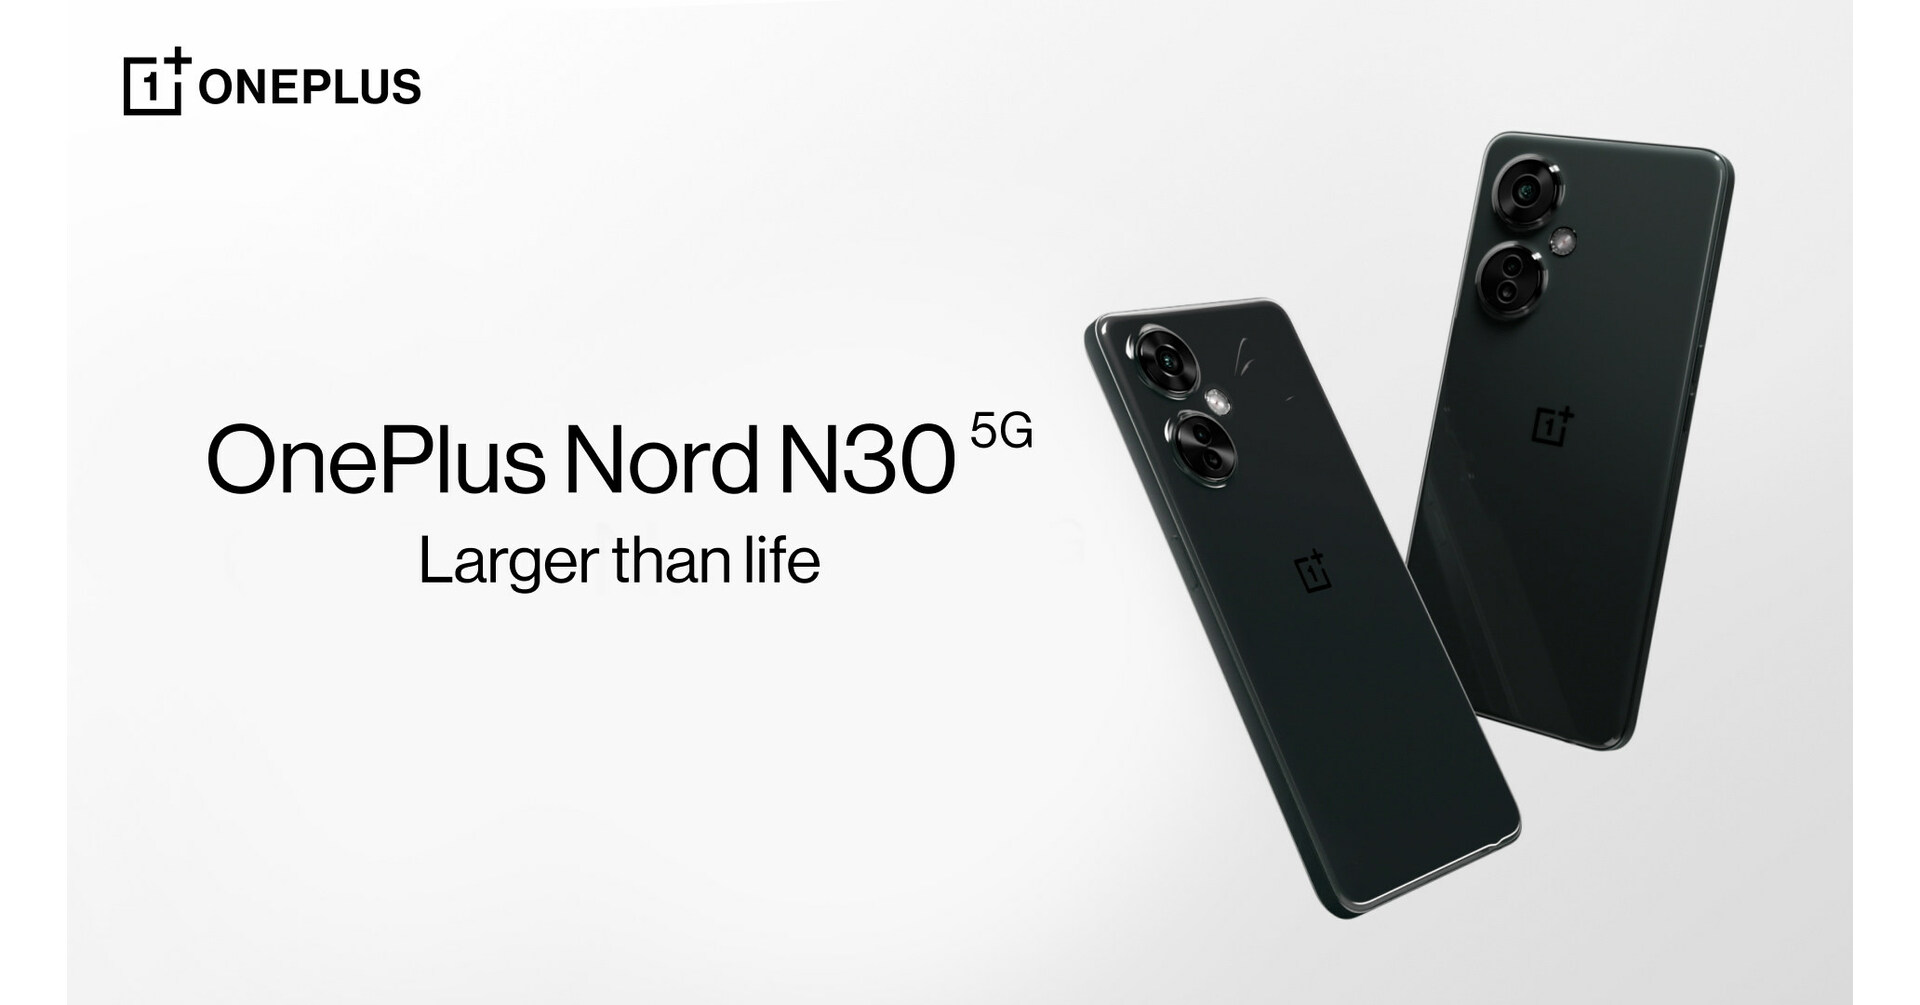 OnePlus Introduces Its New High-Performing Nord Series Smartphone: OnePlus  Nord N30 5G